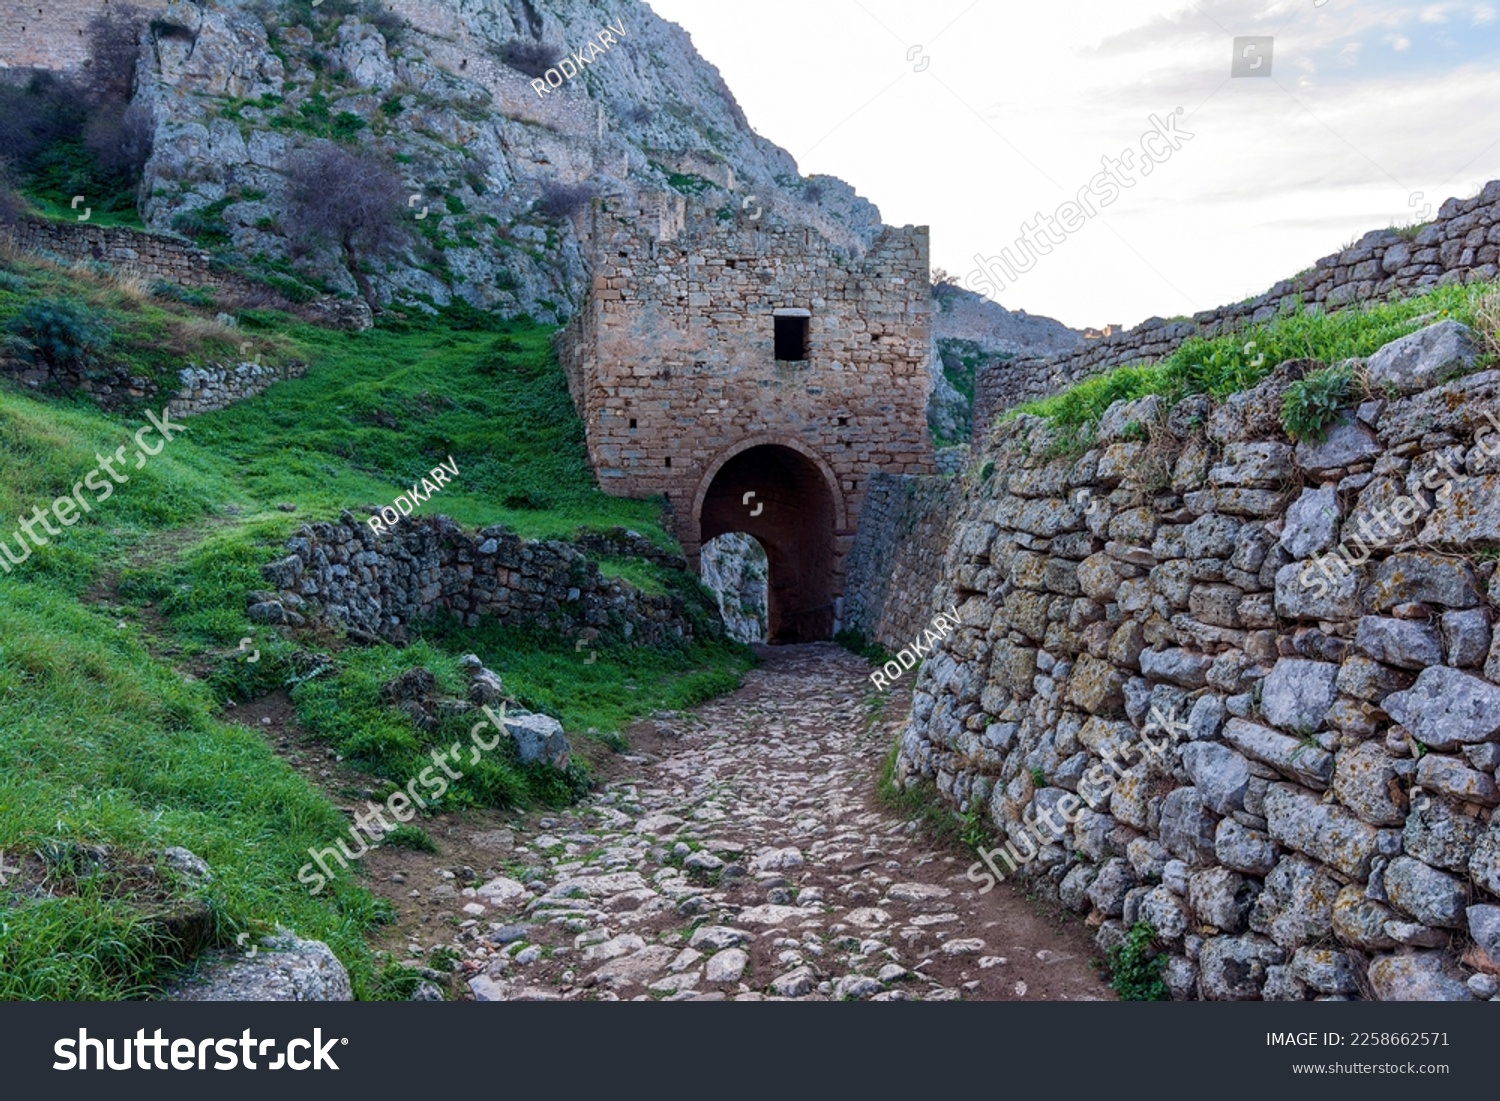 One of the main gates of Acrocorinth, the Citadel of ancient Corinth in Peloponnese, Greece. #2258662571